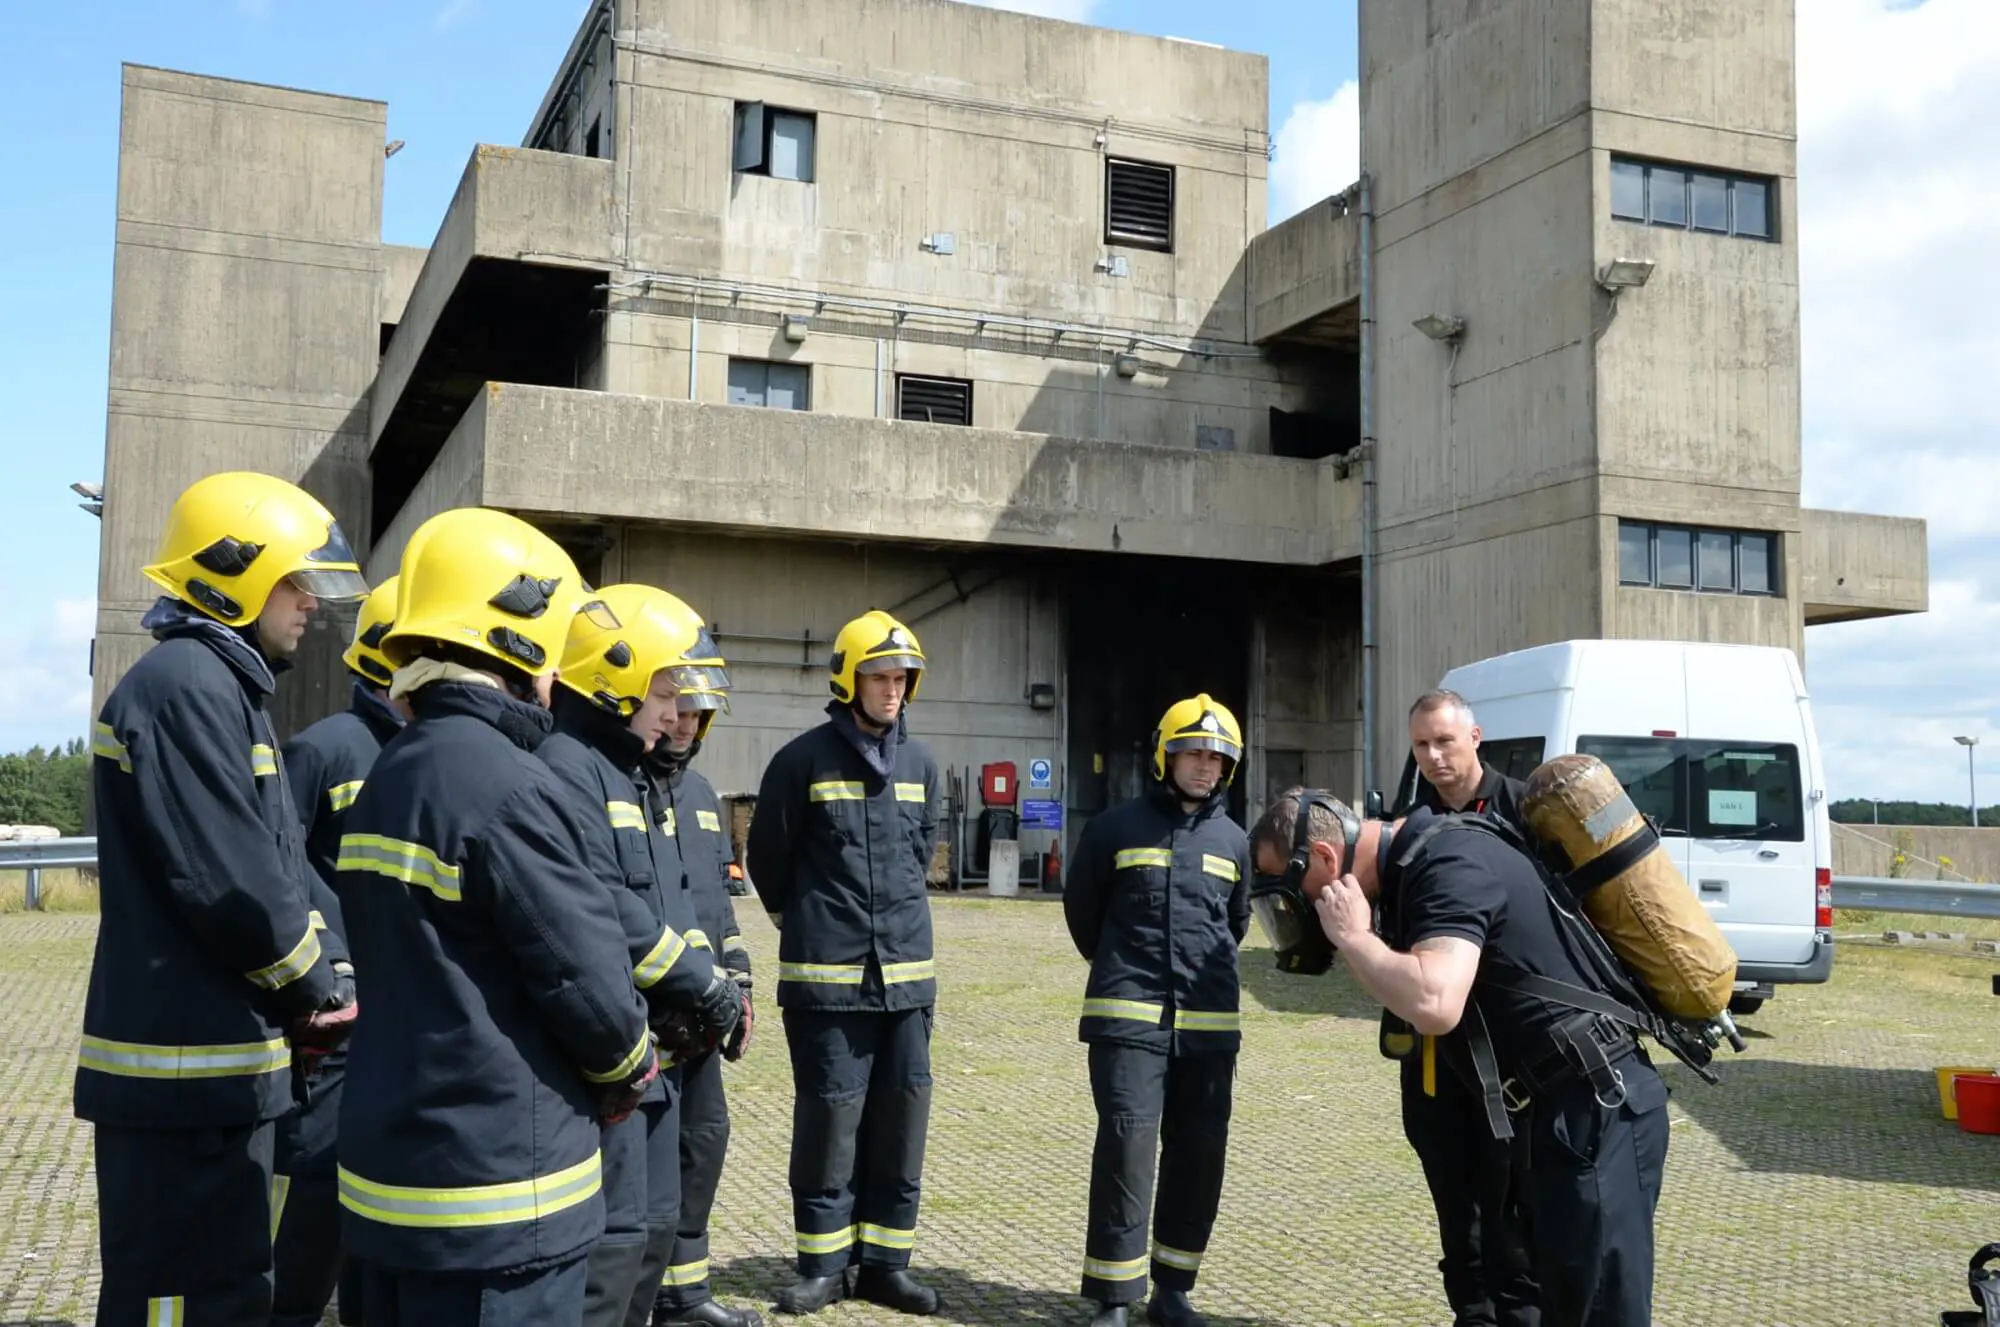 Firefighter trainees watching instructor in breathing apparatus